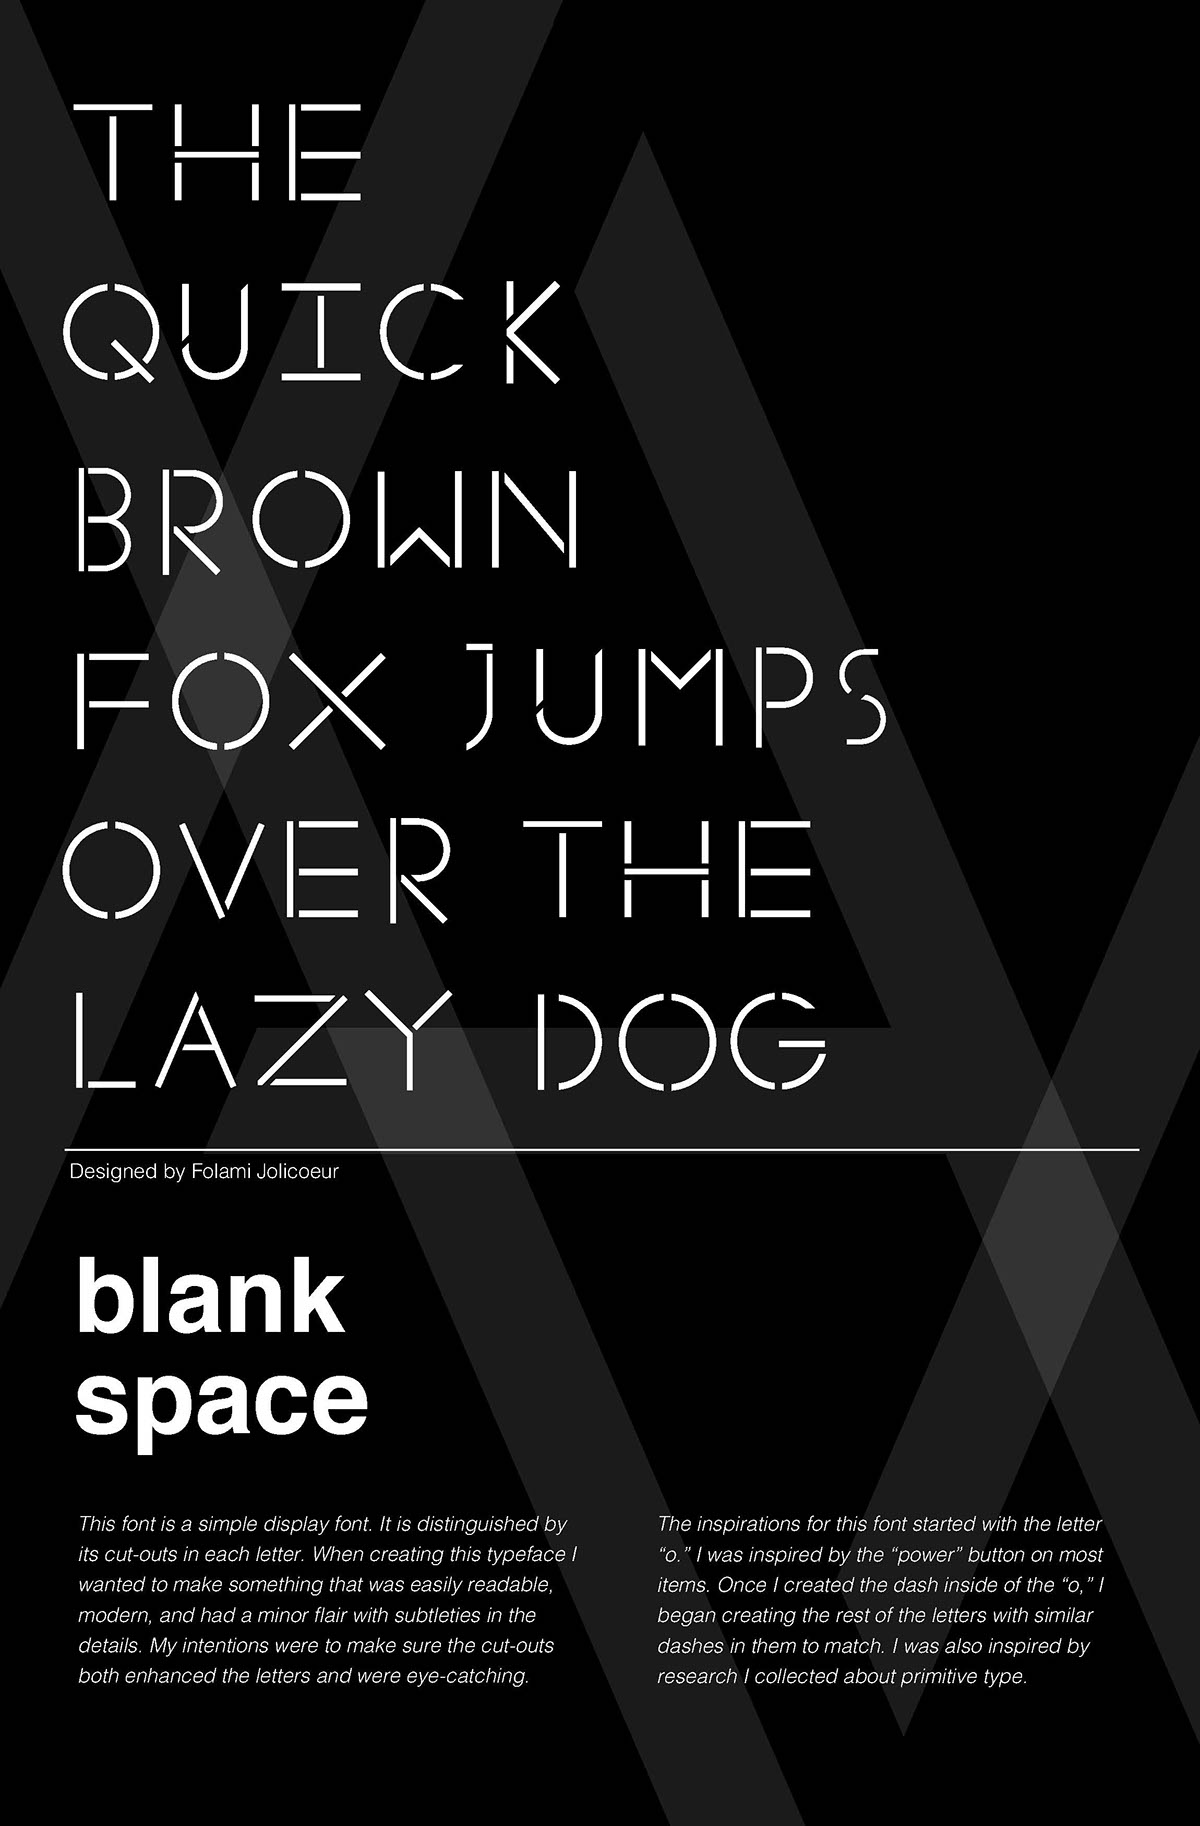 dispaly font Typeface Display blank space